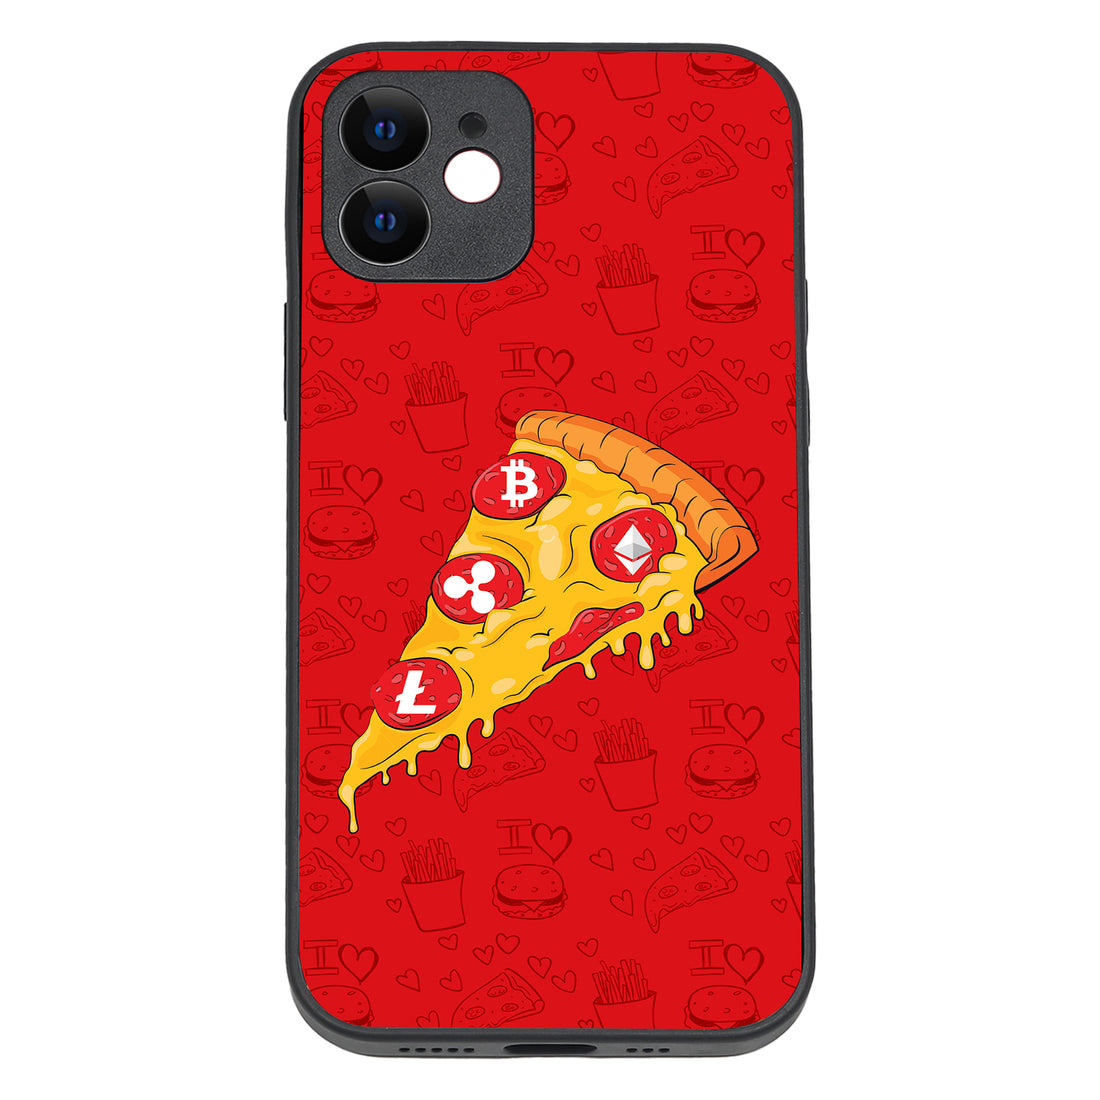 Pizza Trading iPhone 12 Case